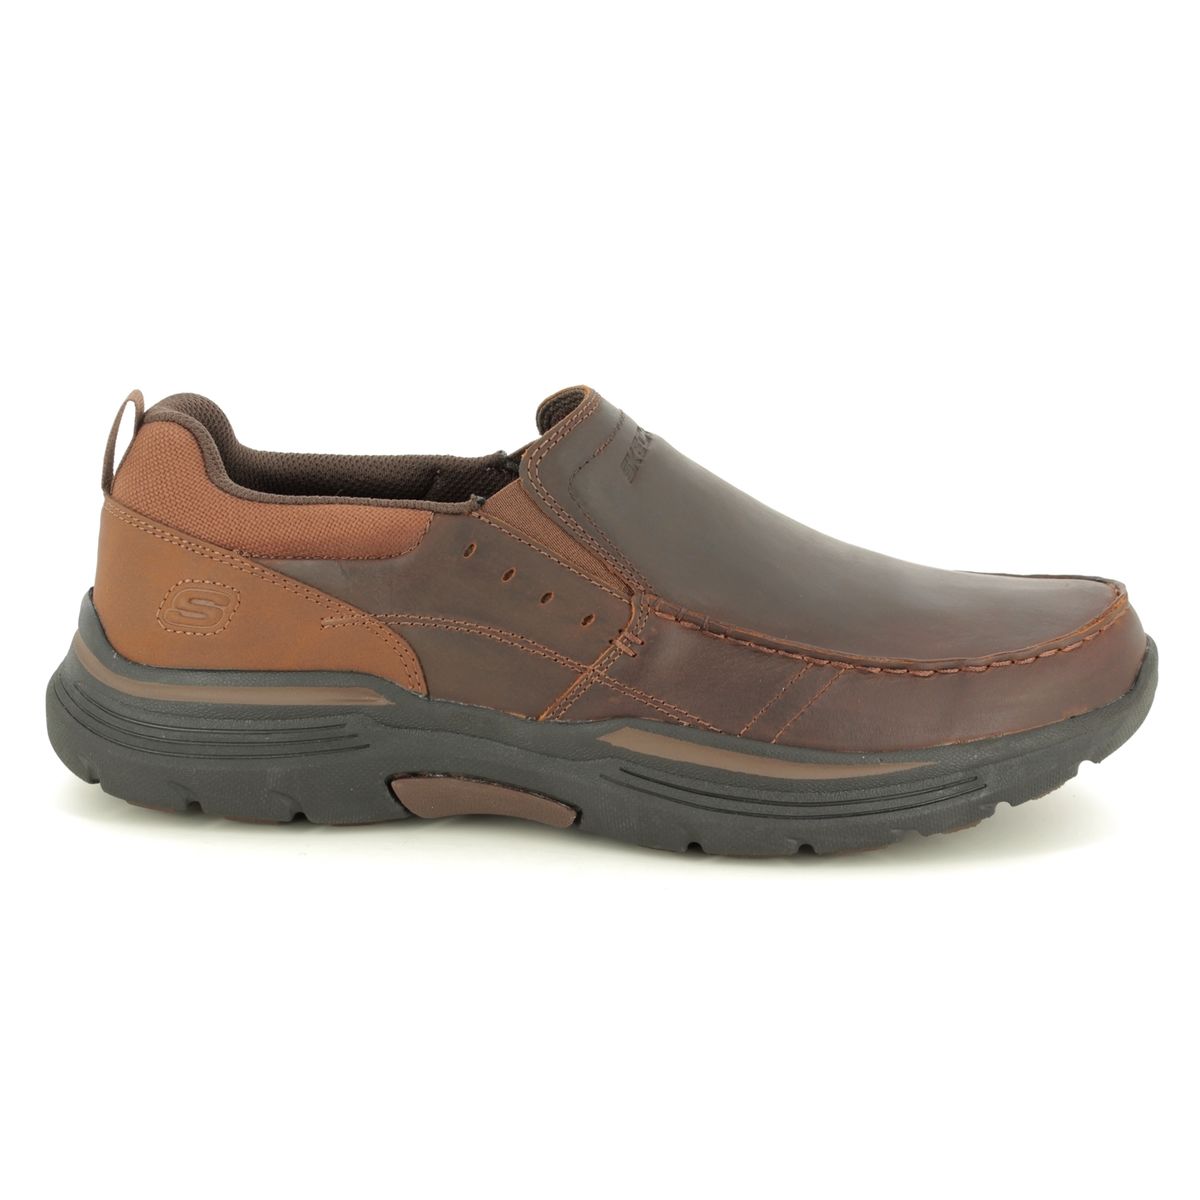 Skechers Seveno Expended 66146 CDB Brown Slip-on Shoes